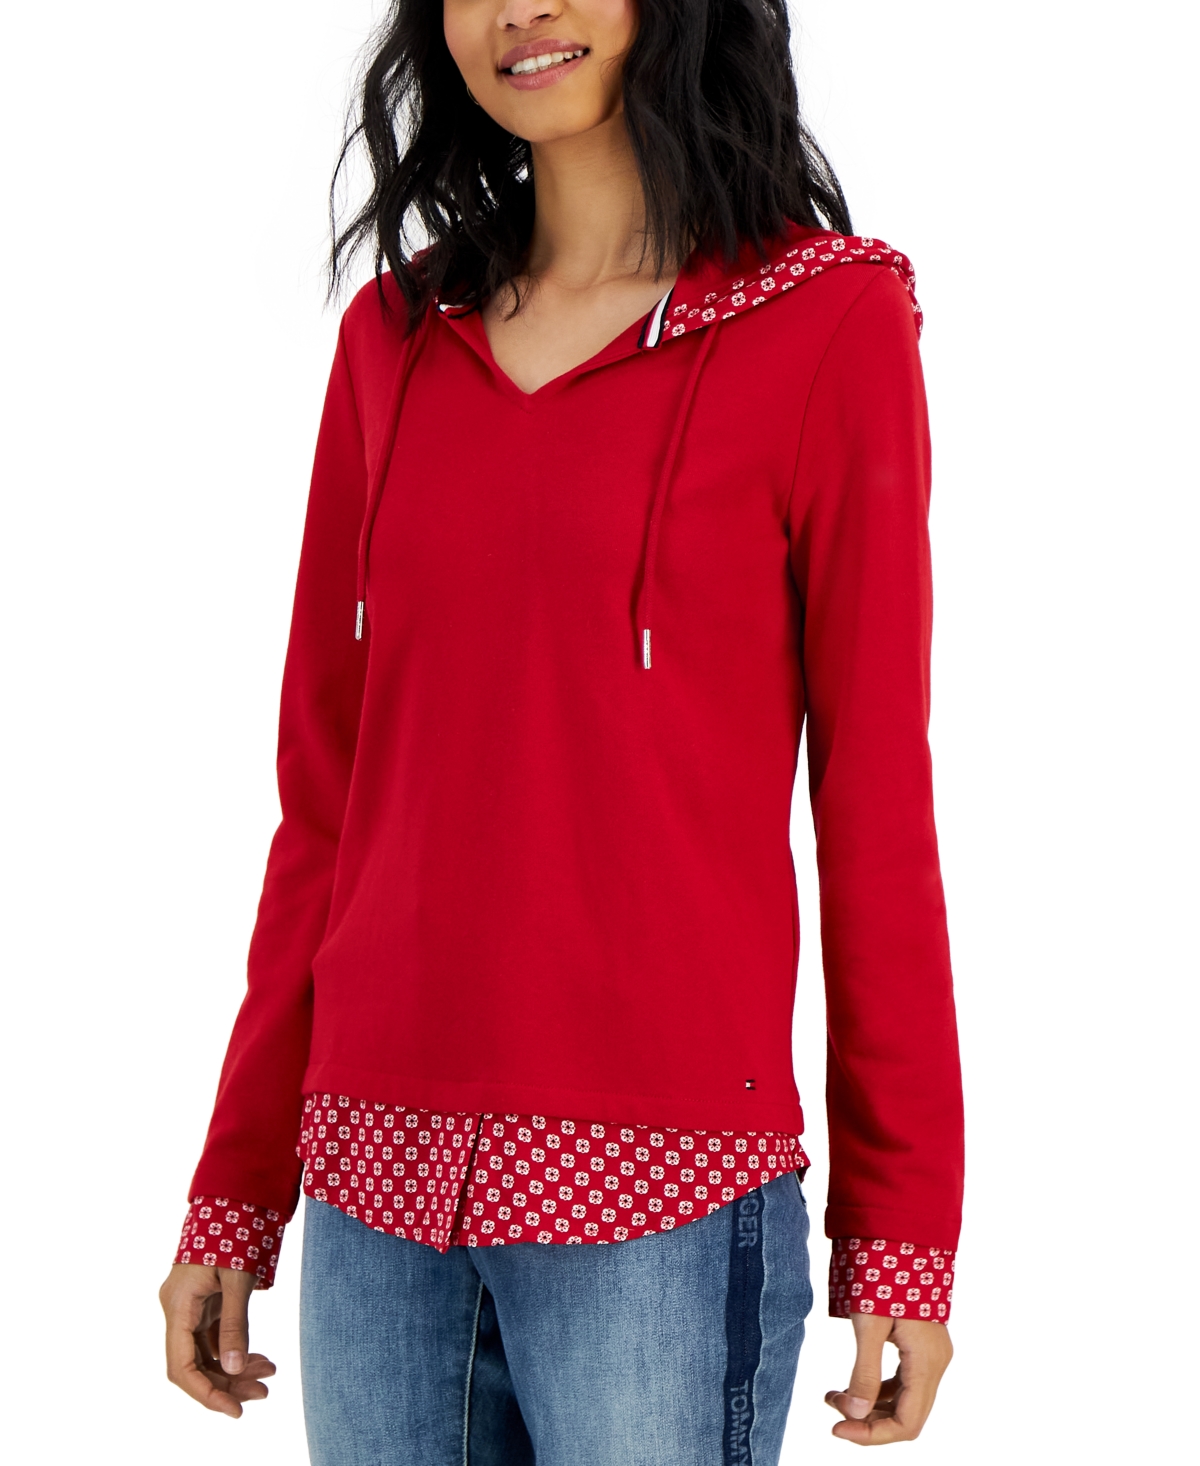  Tommy Hilfiger Women's Layered-Look French Terry Hoodie Top